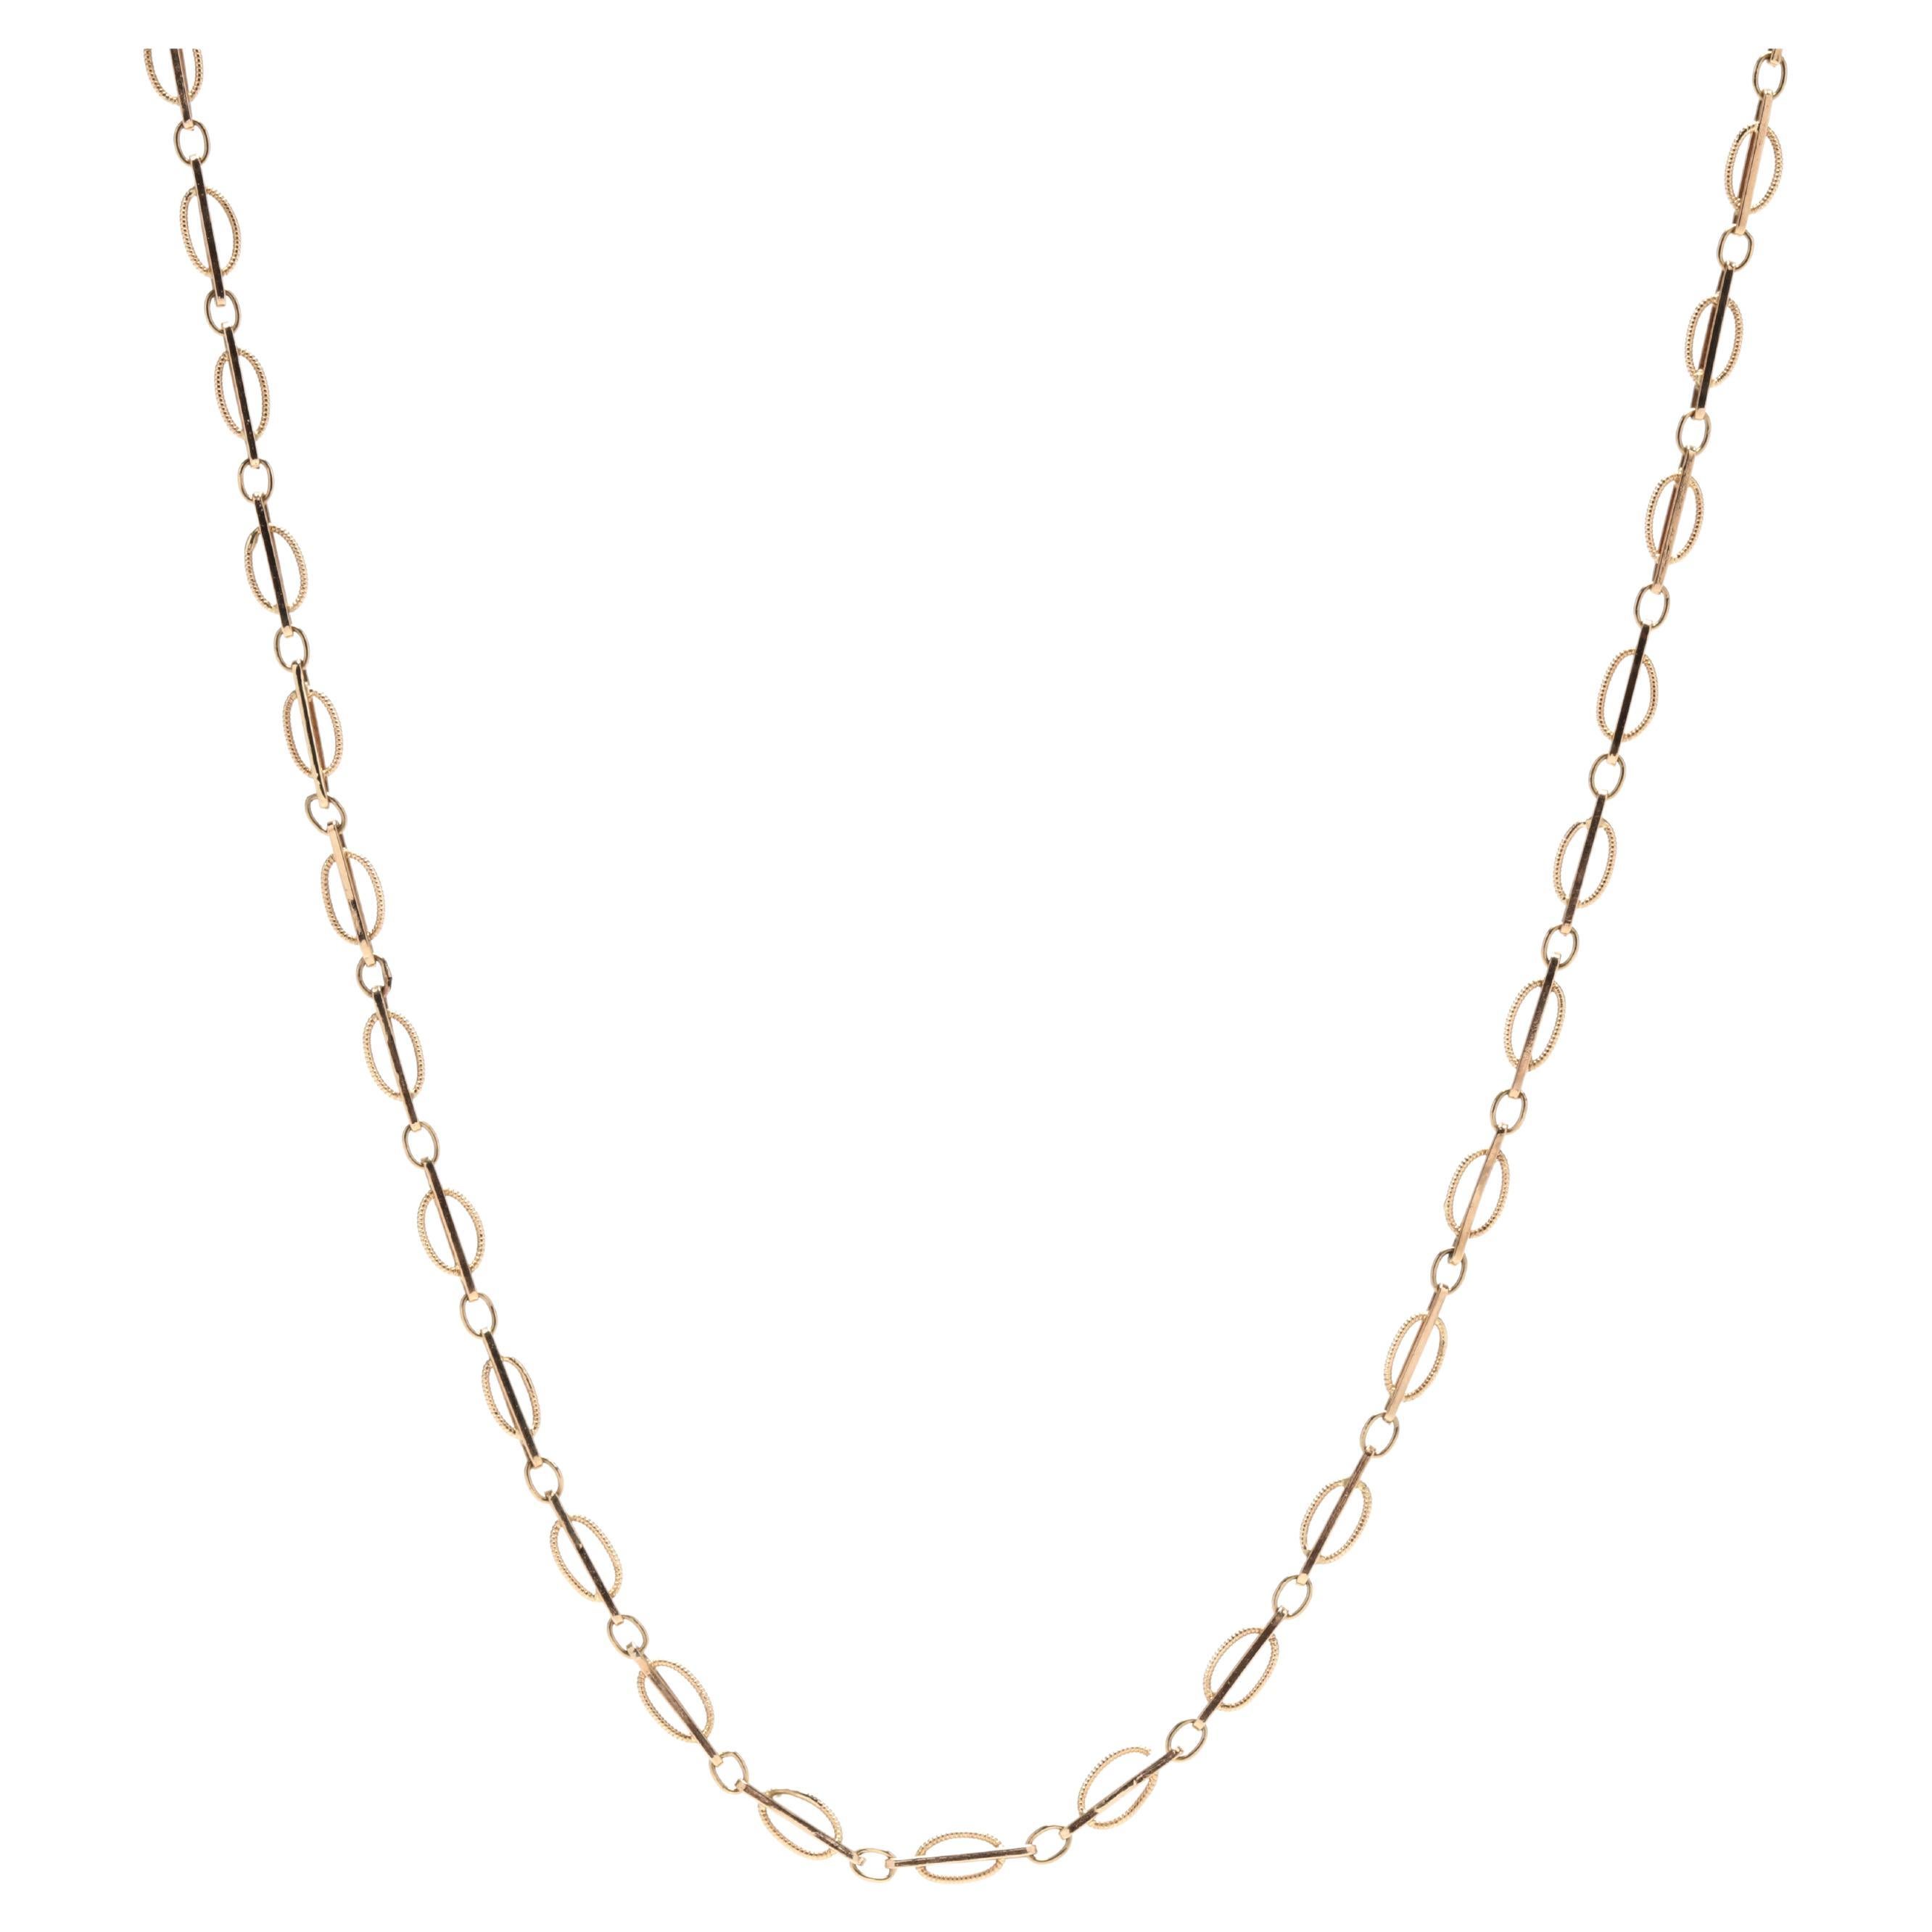 Fancy Oval Bar Link Chain Necklace, 14KT Yellow Gold For Sale